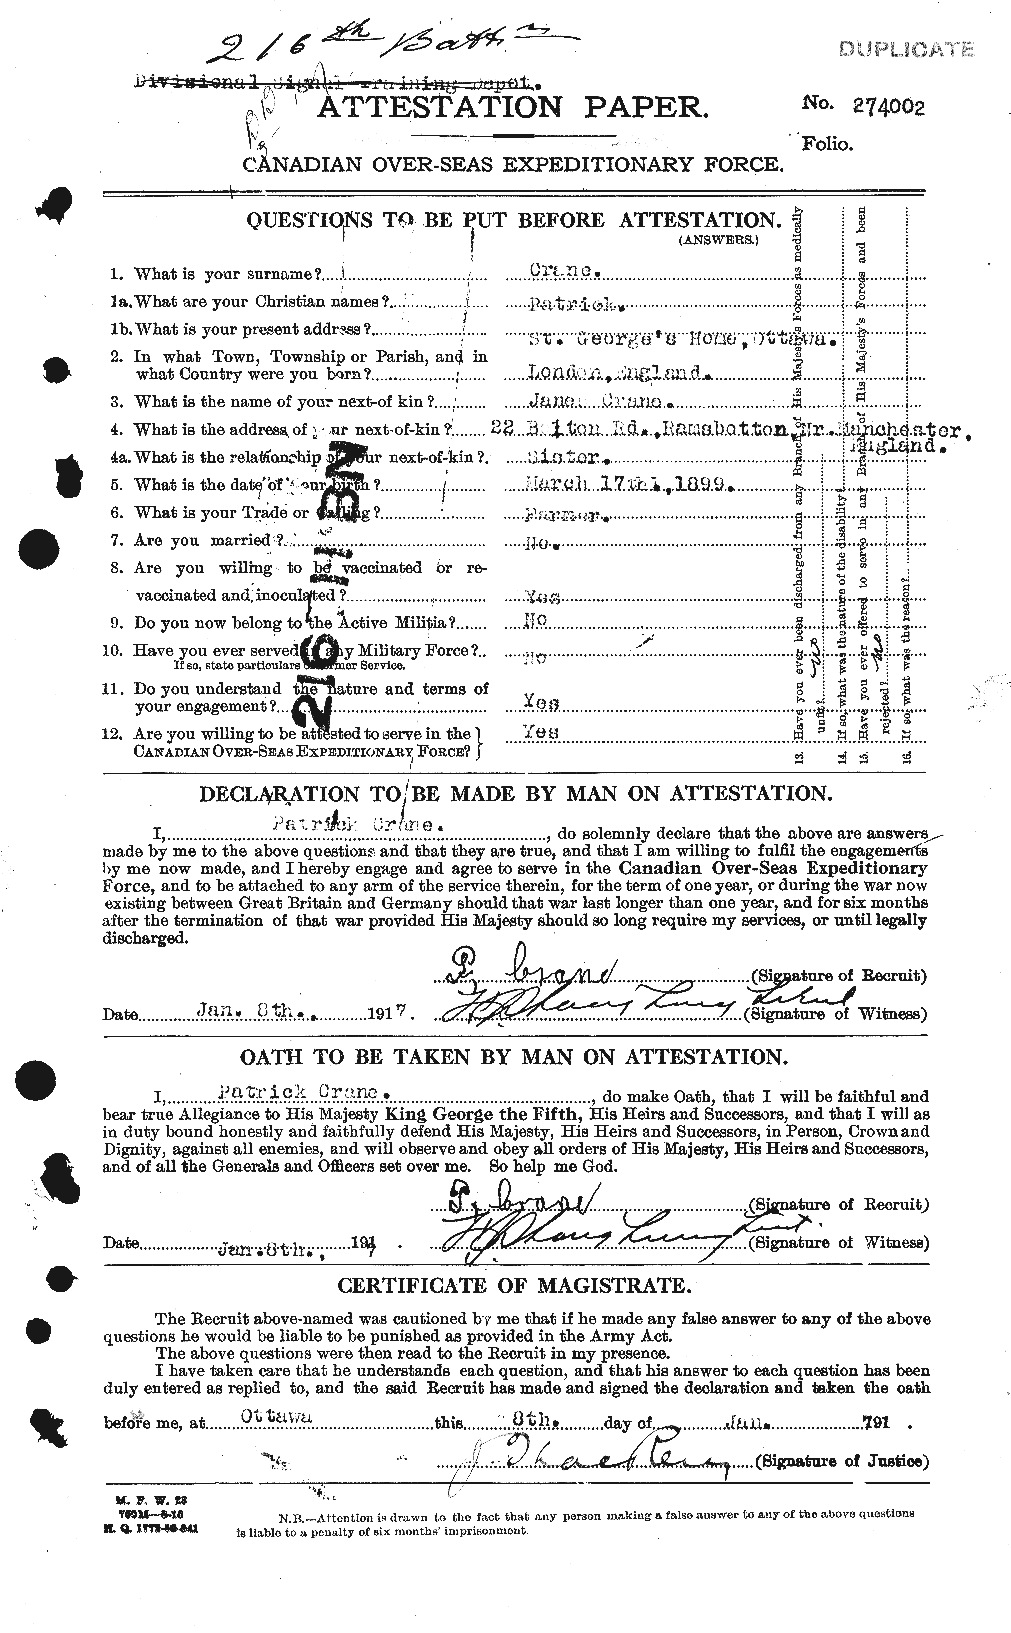 Personnel Records of the First World War - CEF 061760a